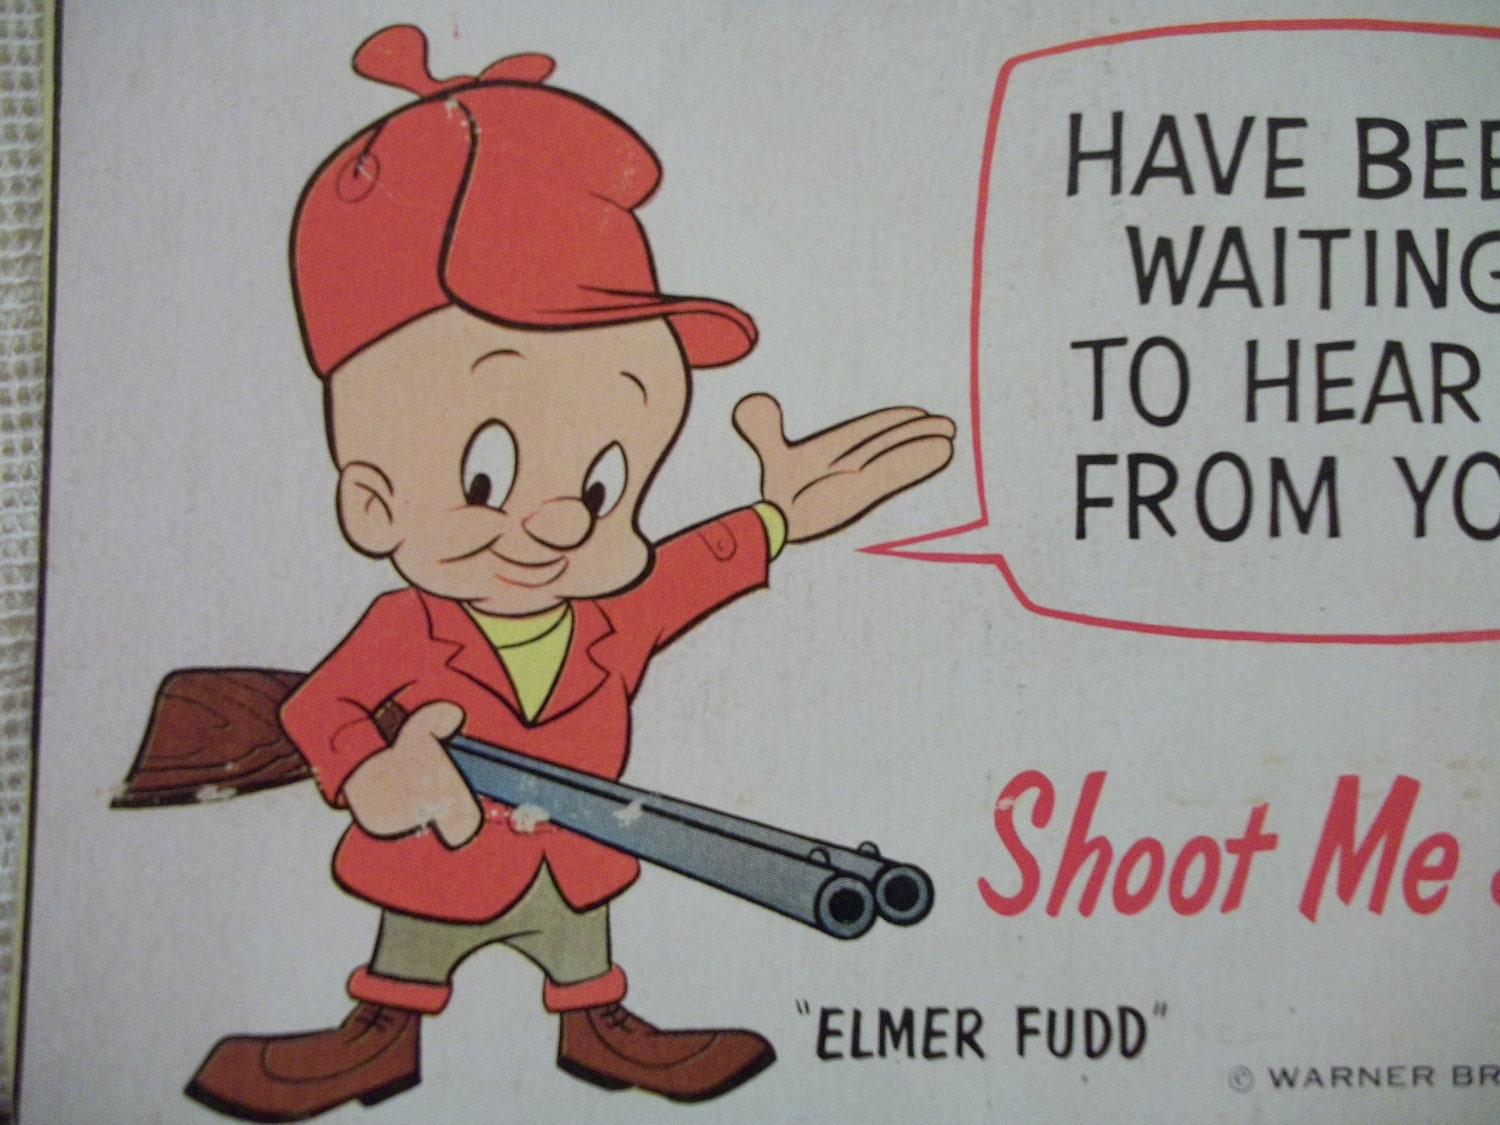 picture of elmer fudd hunting